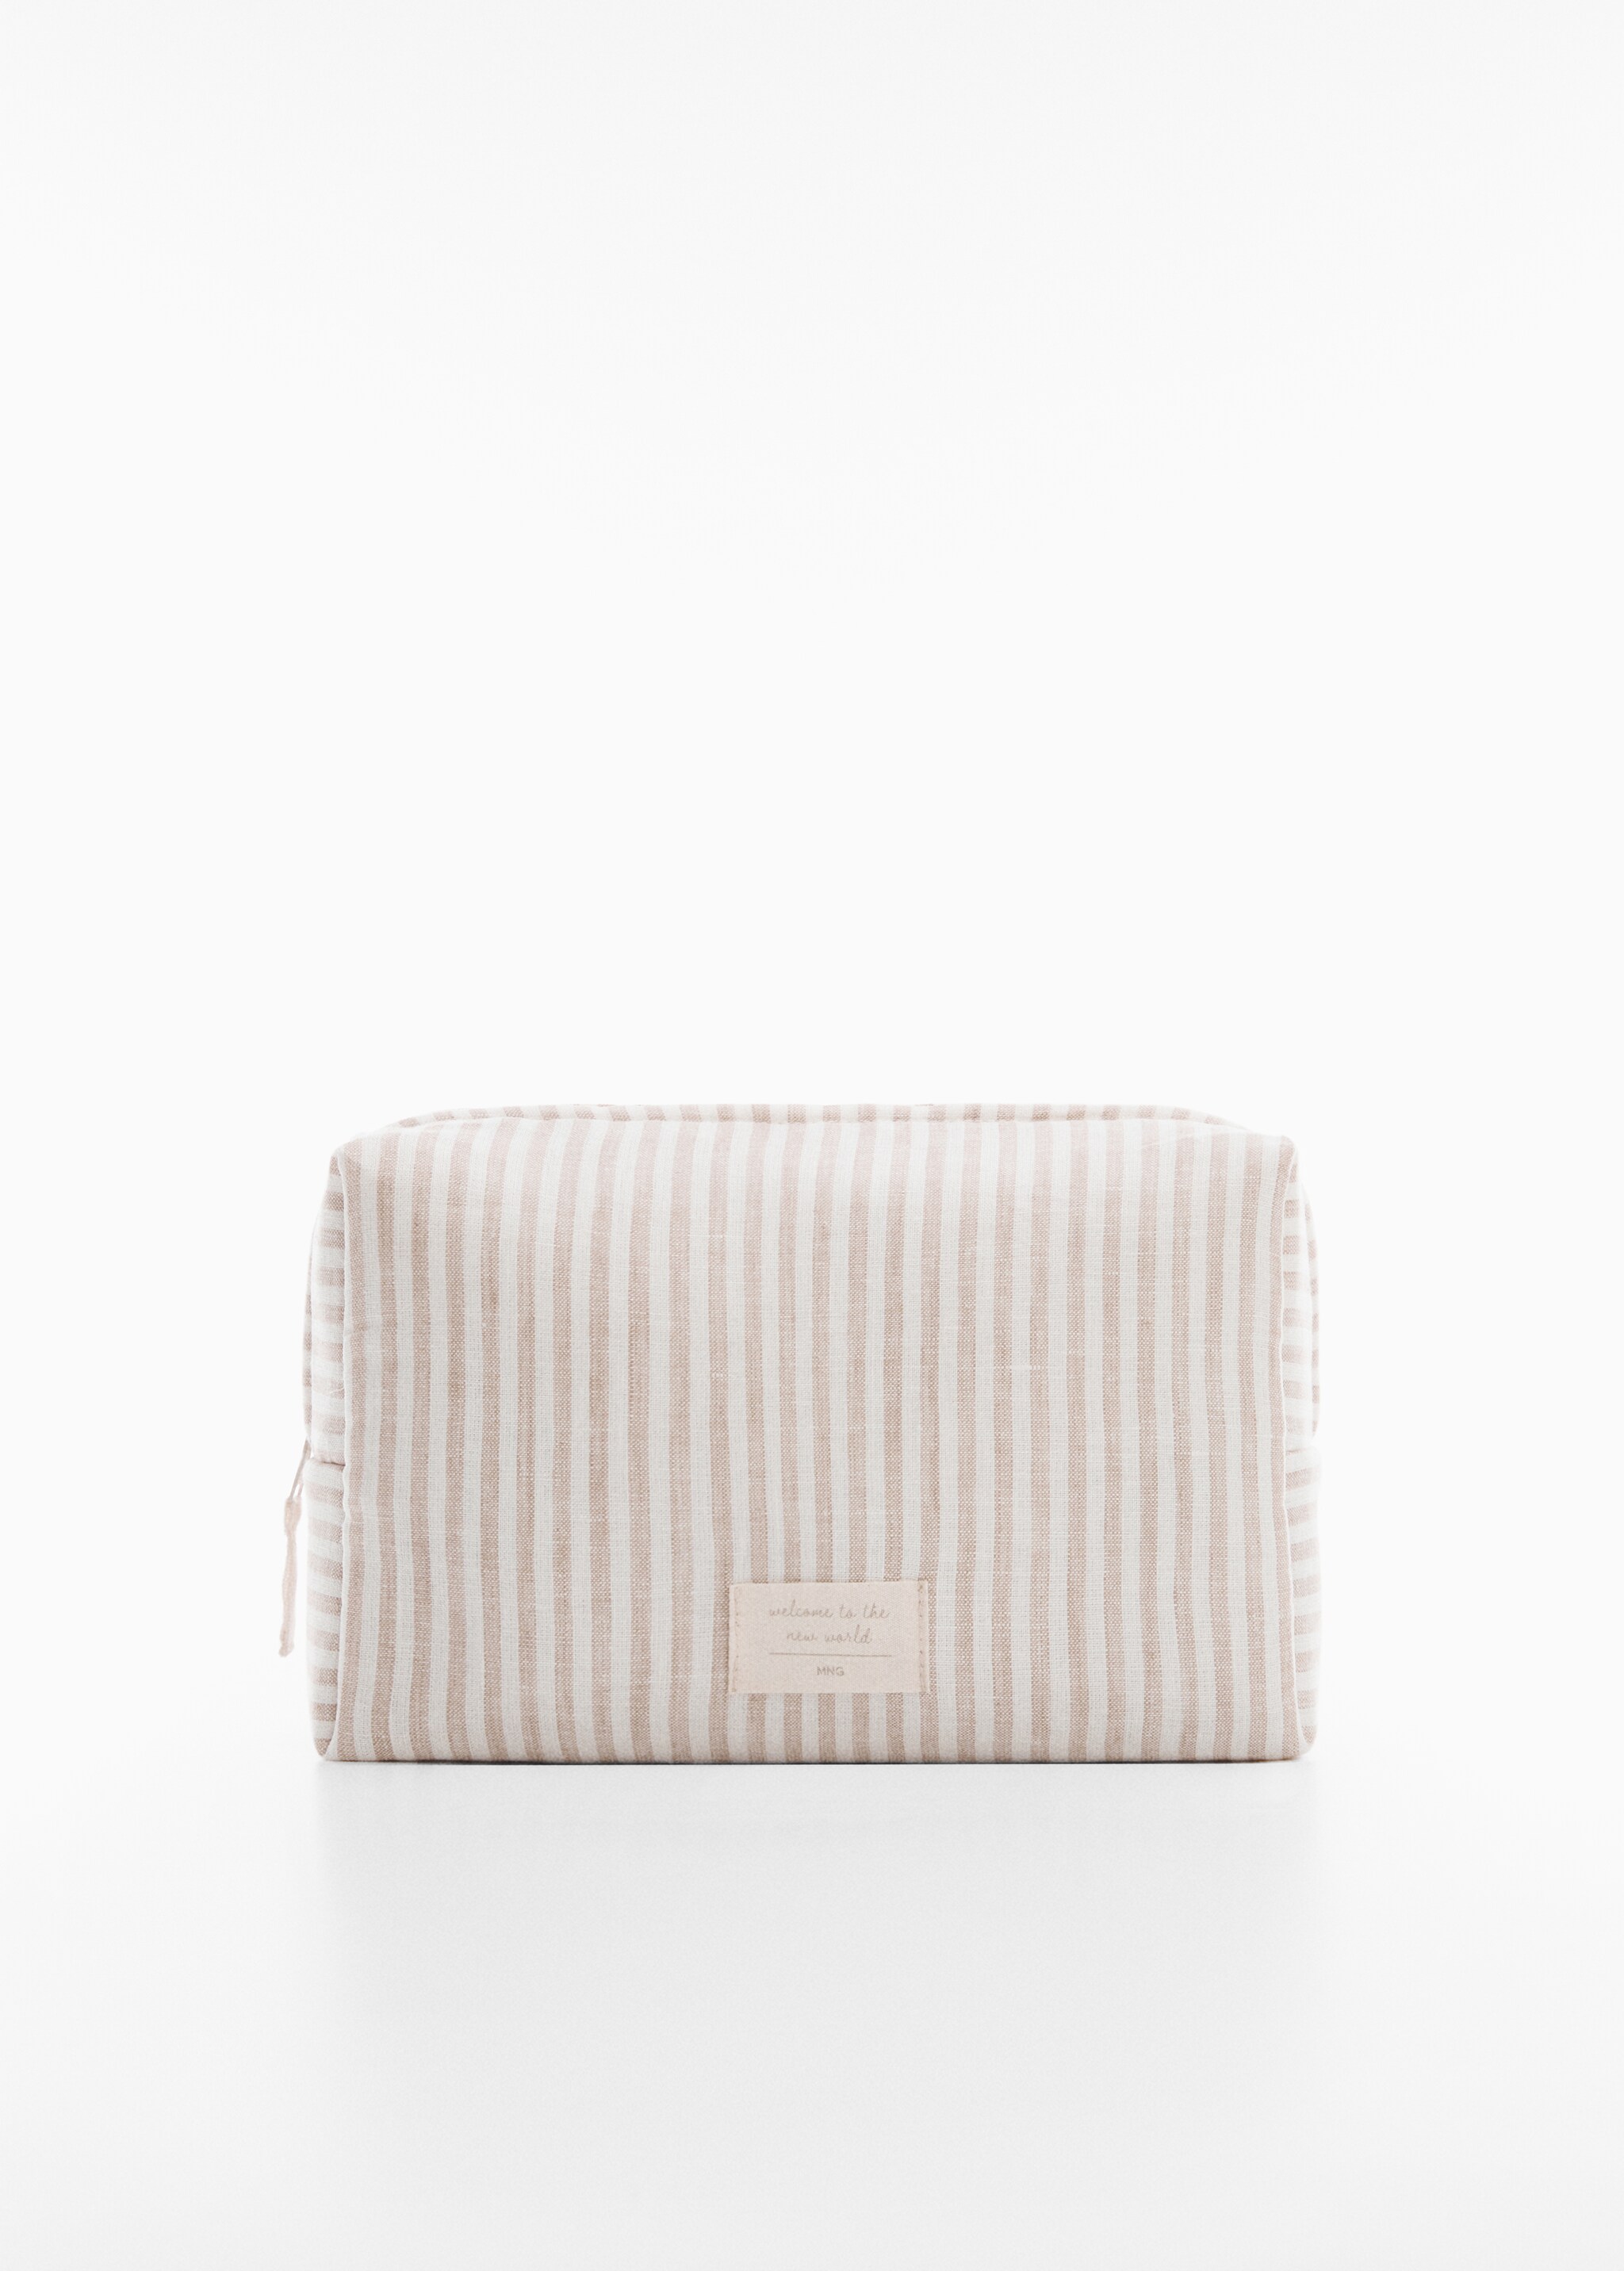 Striped cosmetic bag - Article without model